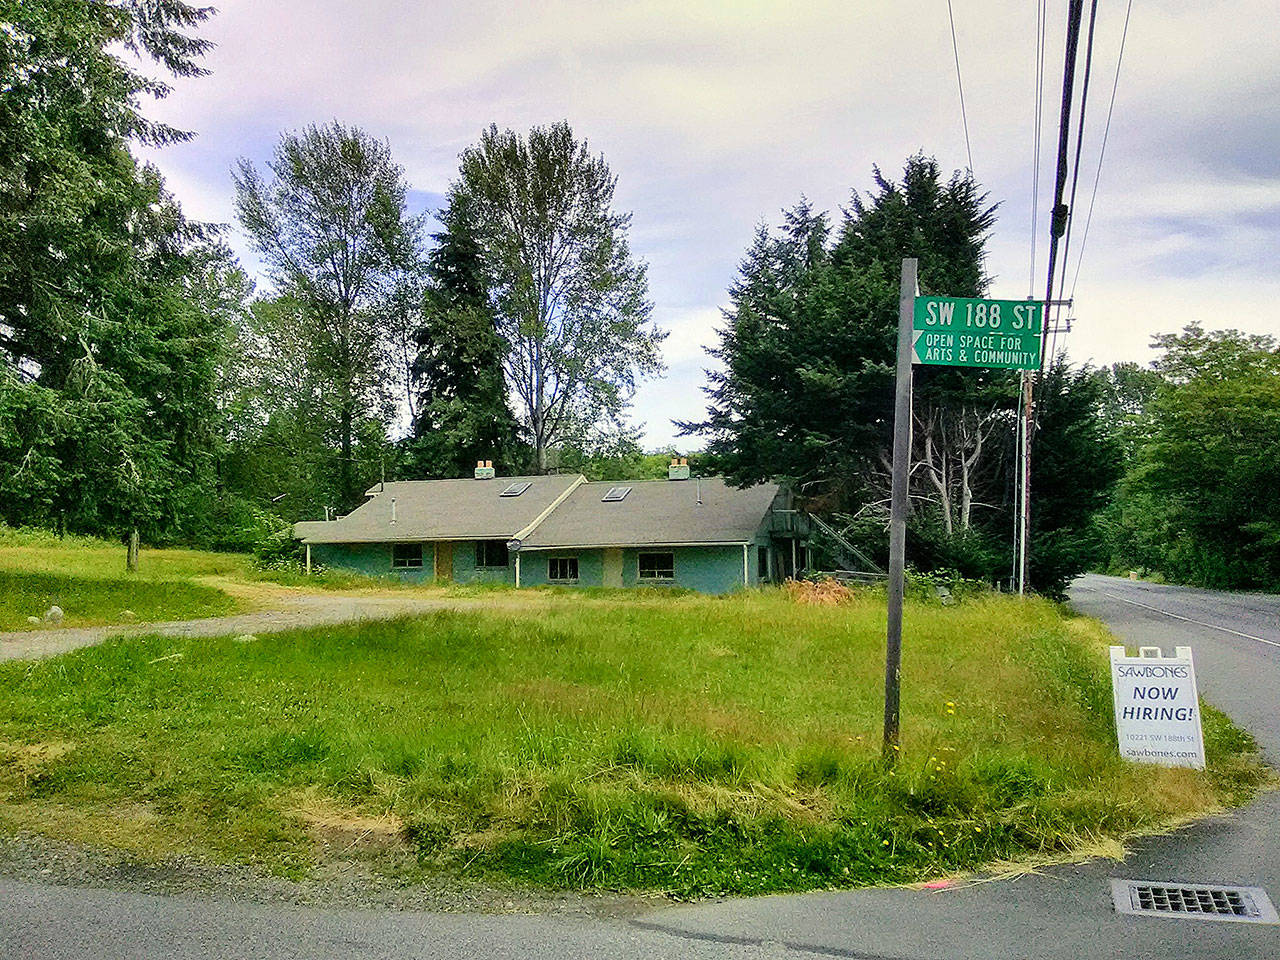 The Island Center Homes development would be built at the corner of SW 188th Street and Vashon Highway (Paul Rowley/Staff Photo).